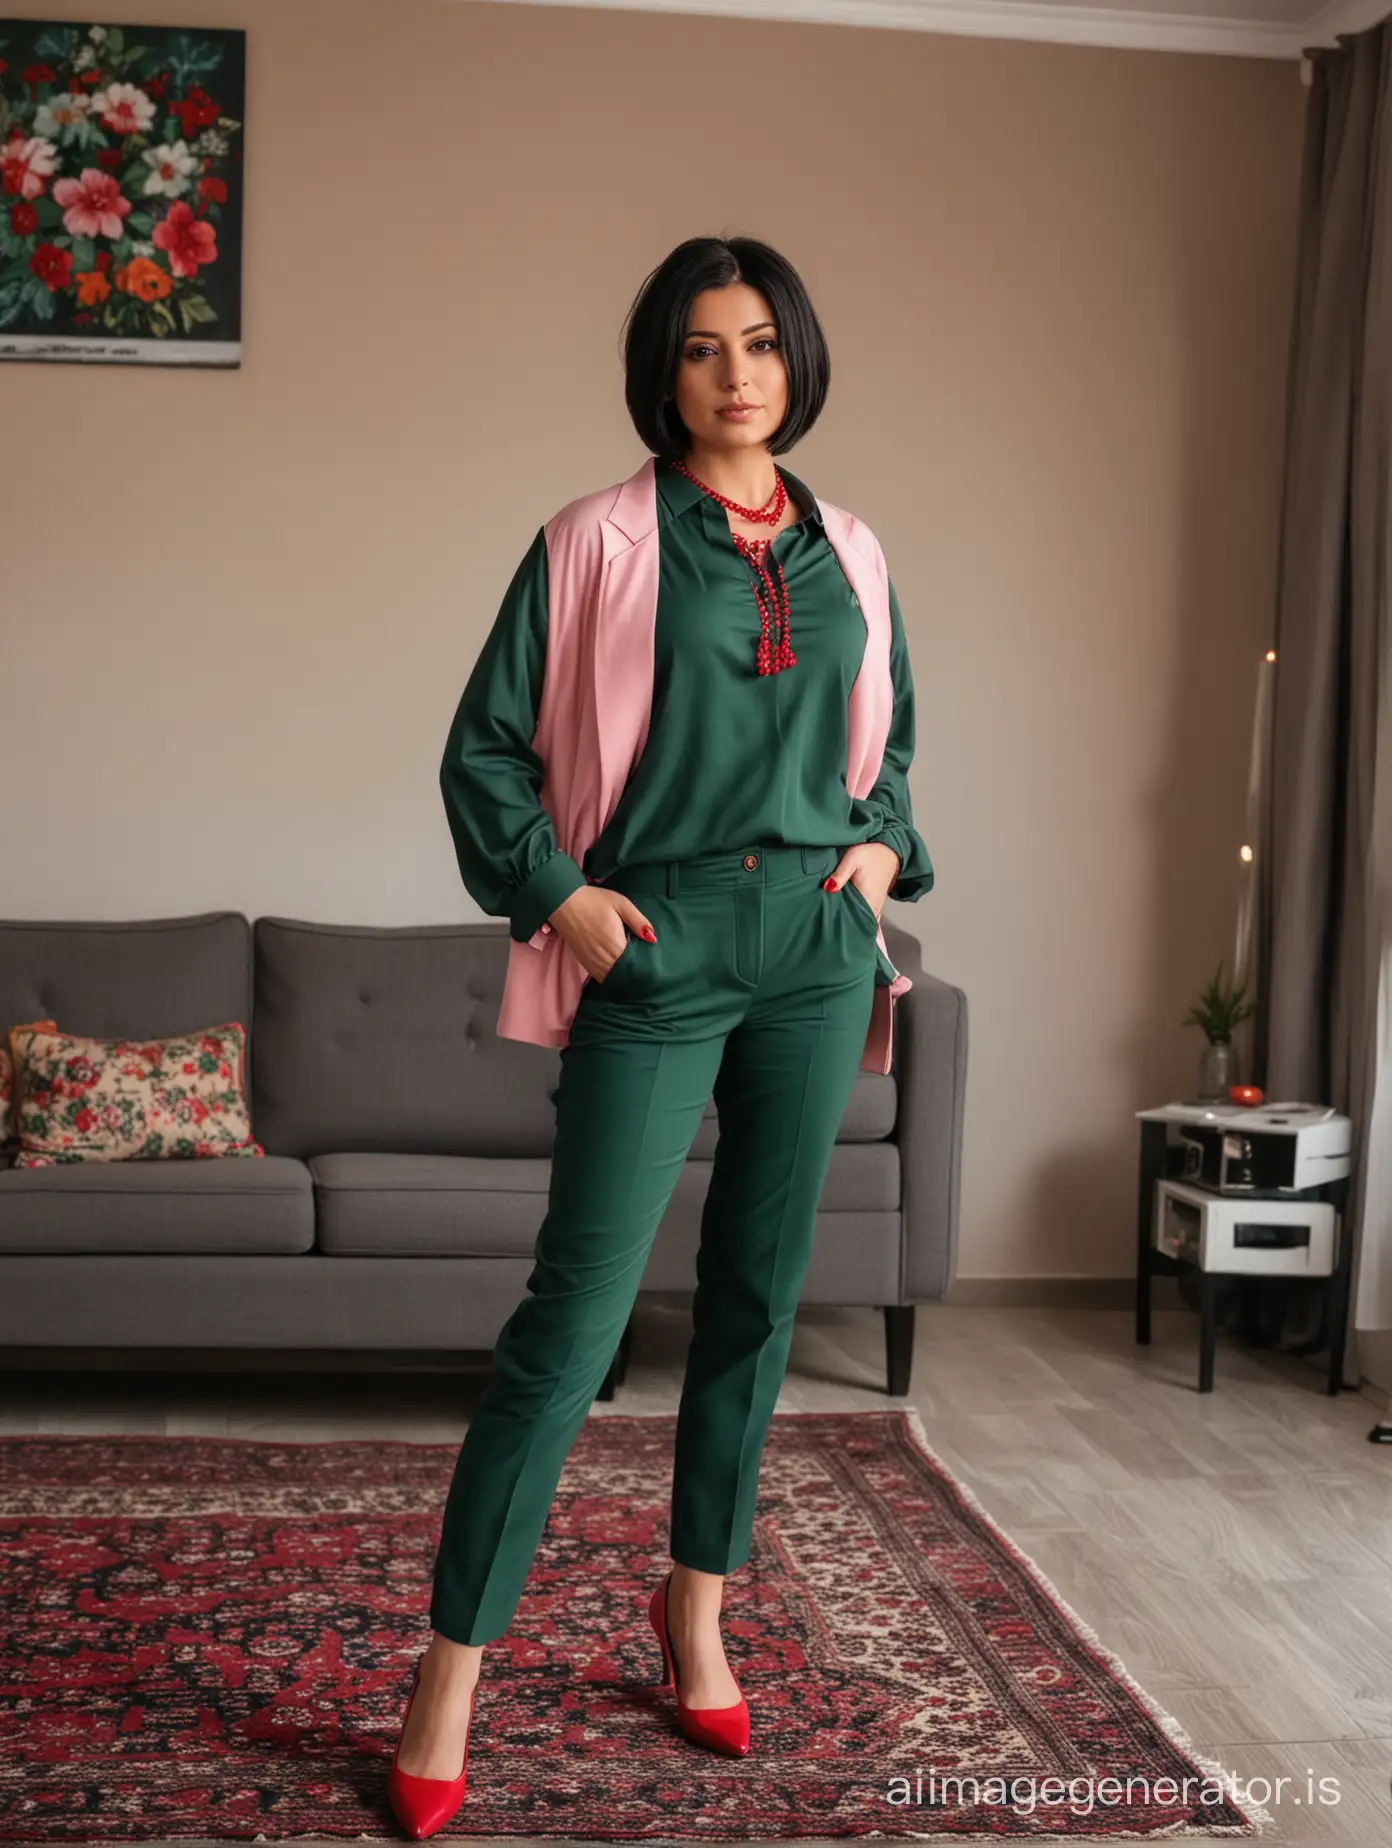 iranian woman 30 years old, dark green suits, pink shirt, red necklace. black bob hair, black shoes, standing in a cozy living room ,full body shot, morning light